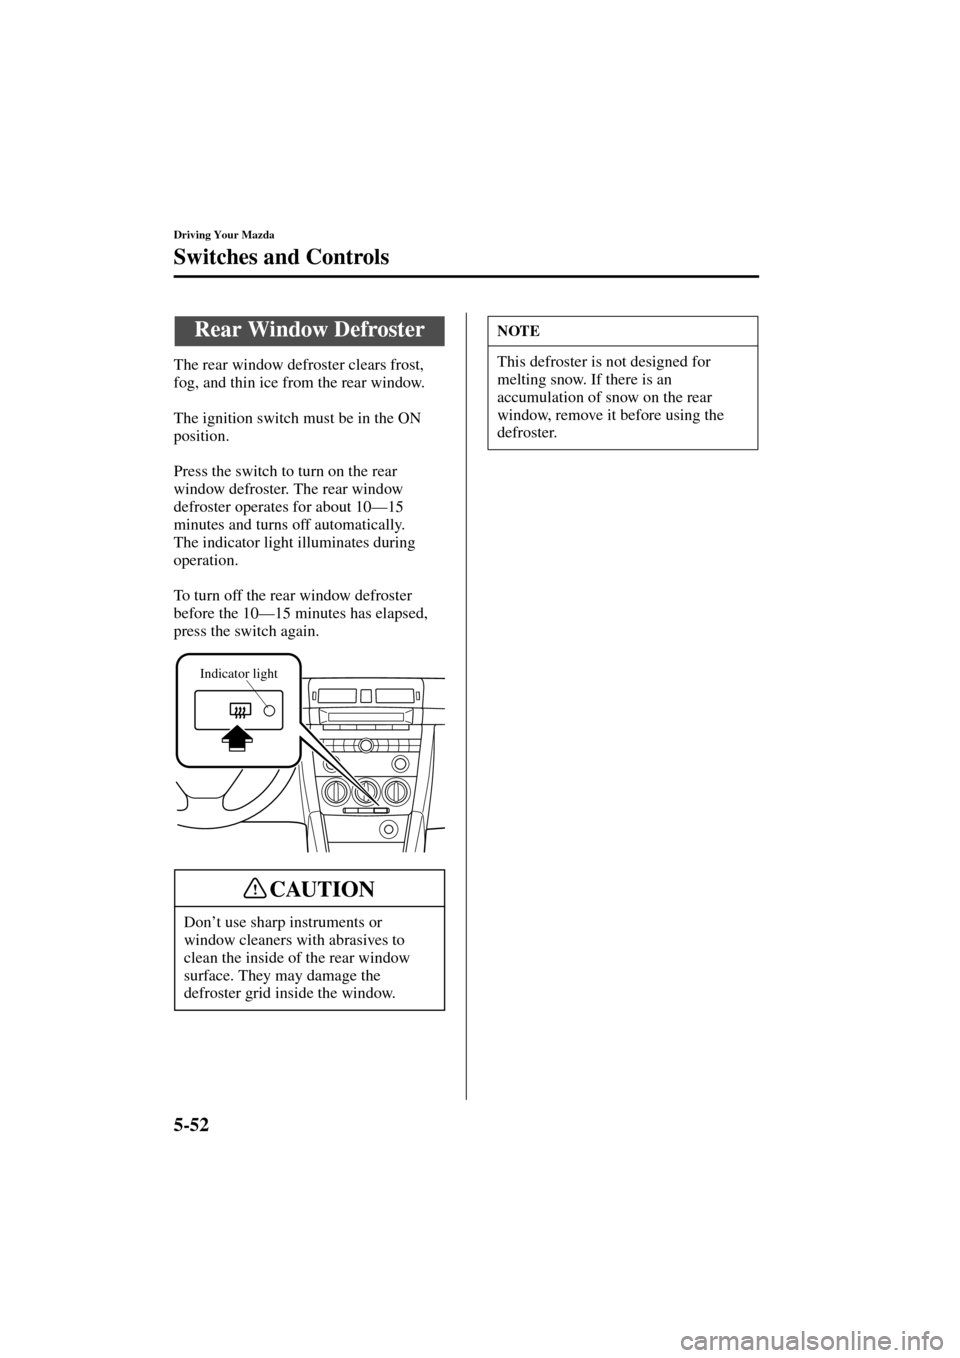 MAZDA MODEL 3 HATCHBACK 2004  Owners Manual (in English) 5-52
Driving Your Mazda
Switches and Controls
Form No. 8S18-EA-03I
The rear window defroster clears frost, 
fog, and thin ice from the rear window.
The ignition switch must be in the ON 
position.
Pre